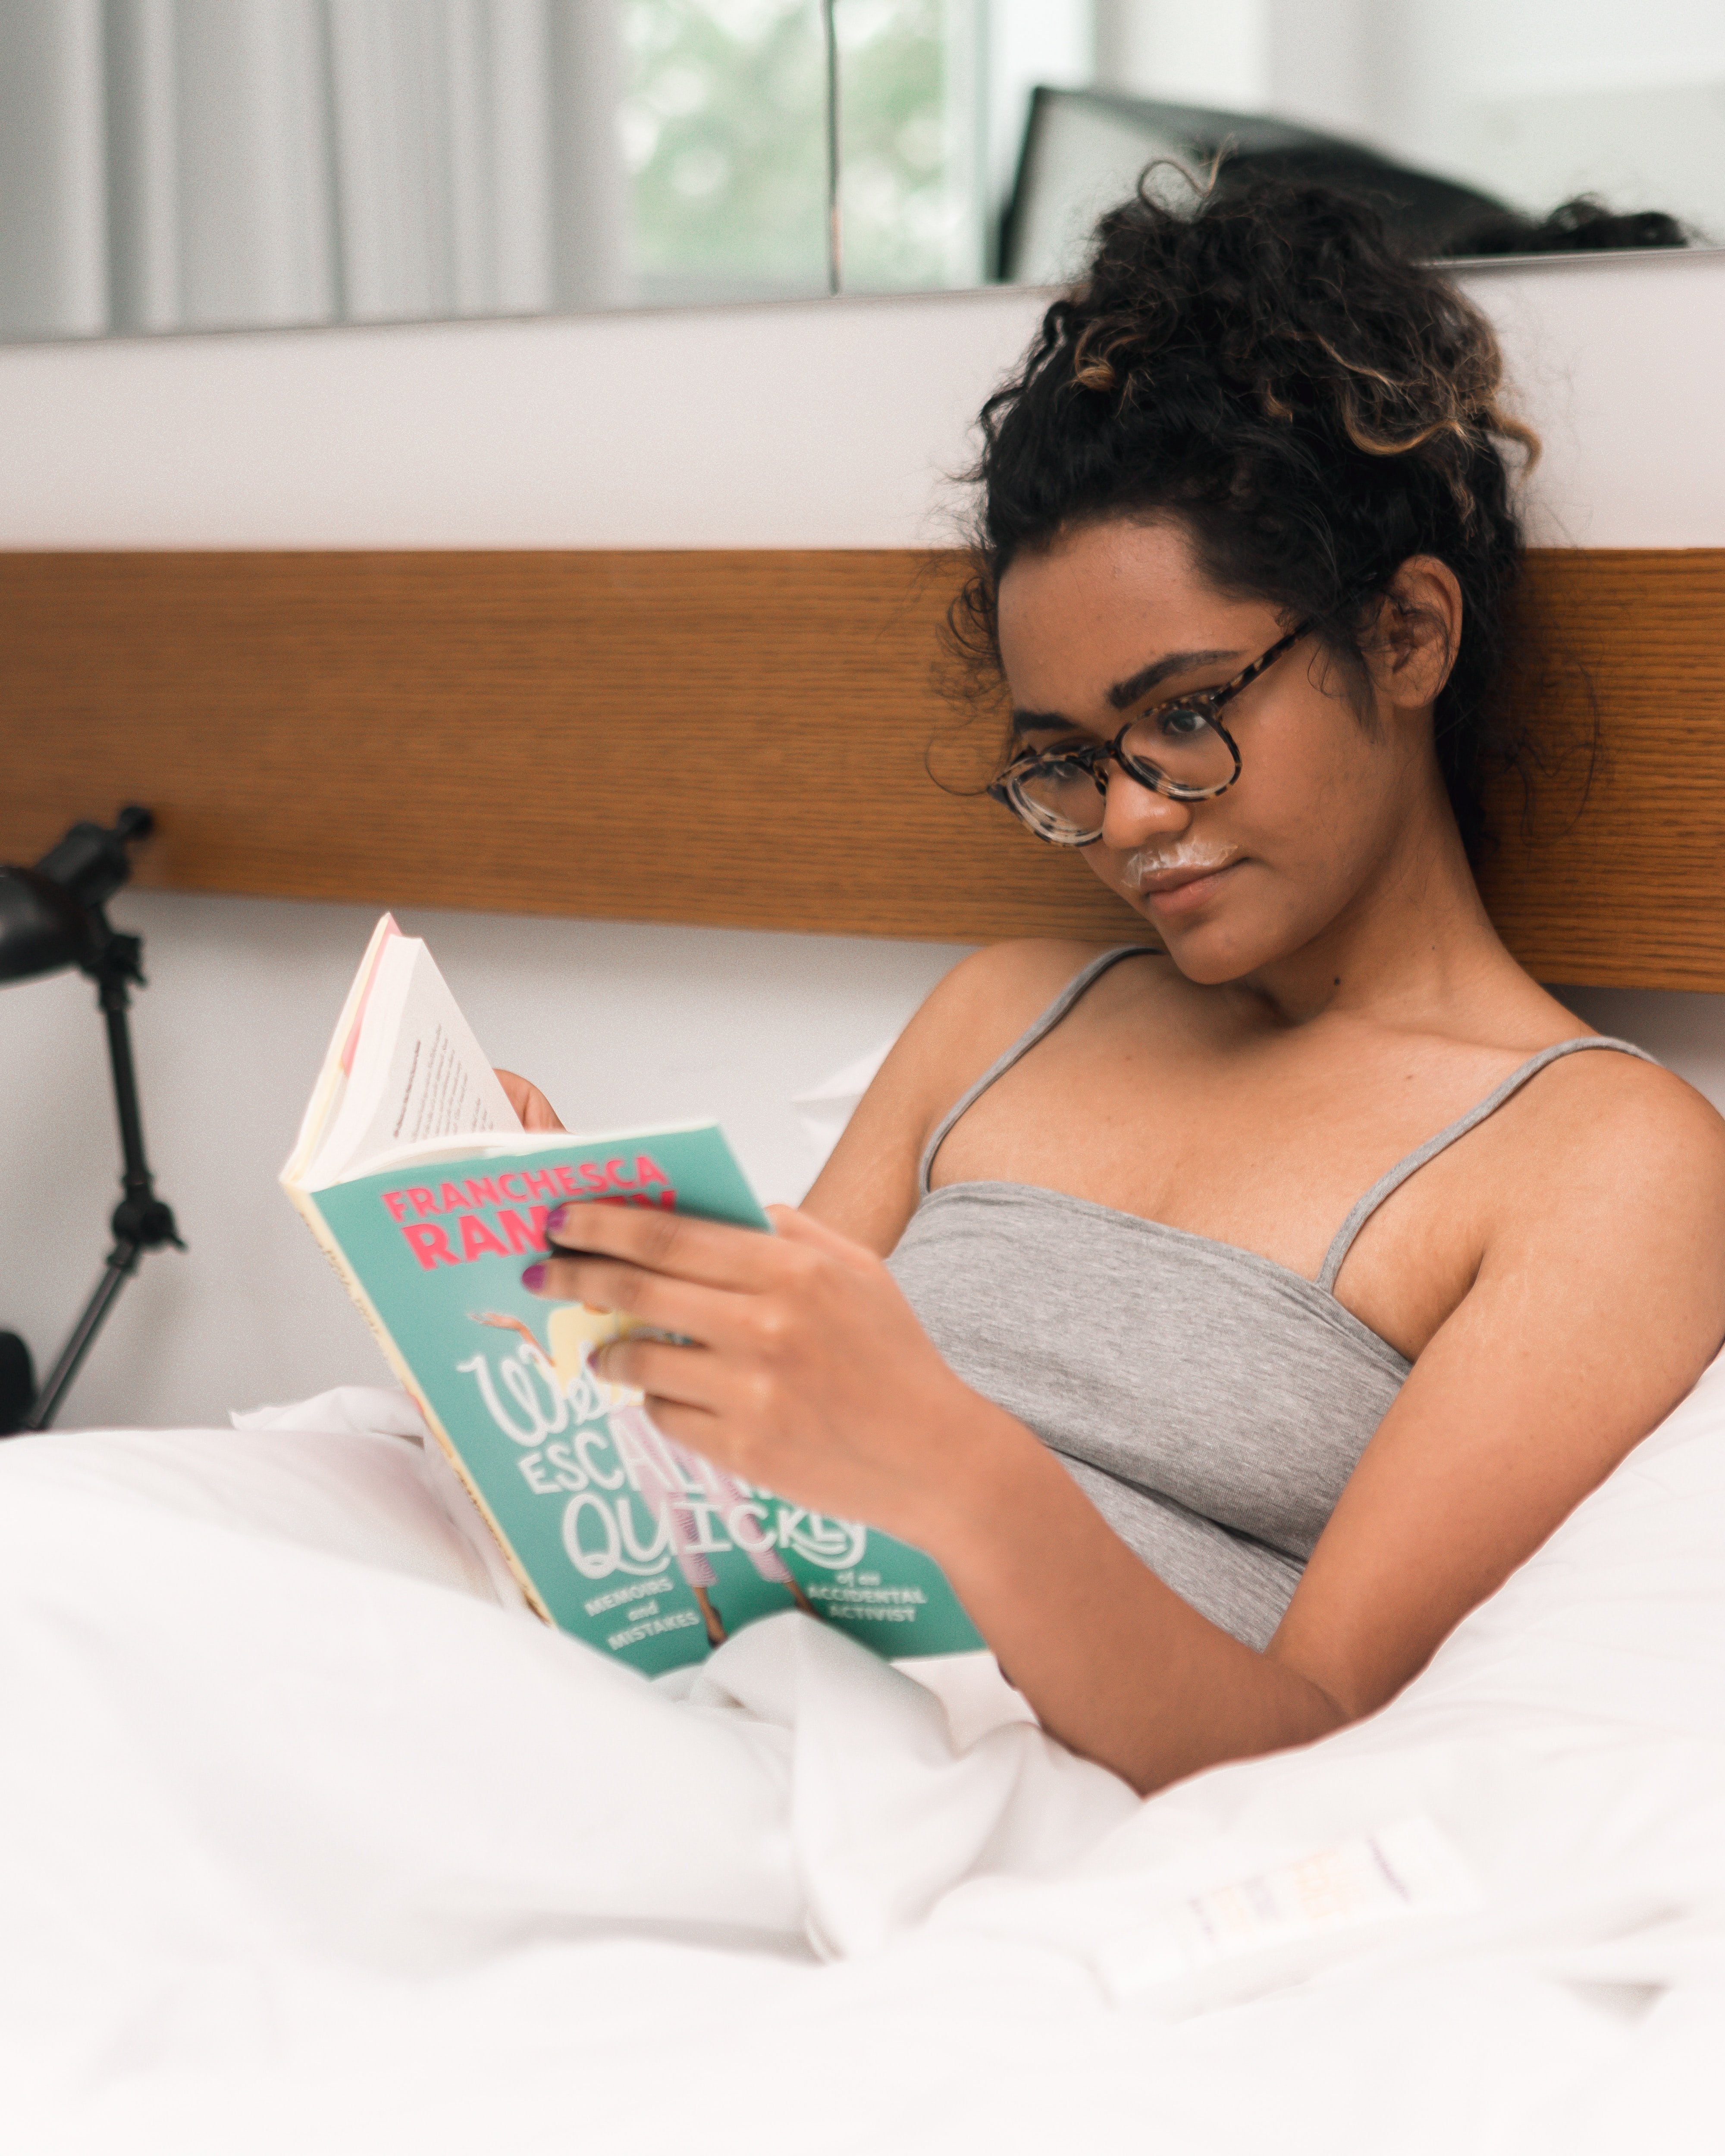 A woman reading a book in bed | Source: Unsplash.com